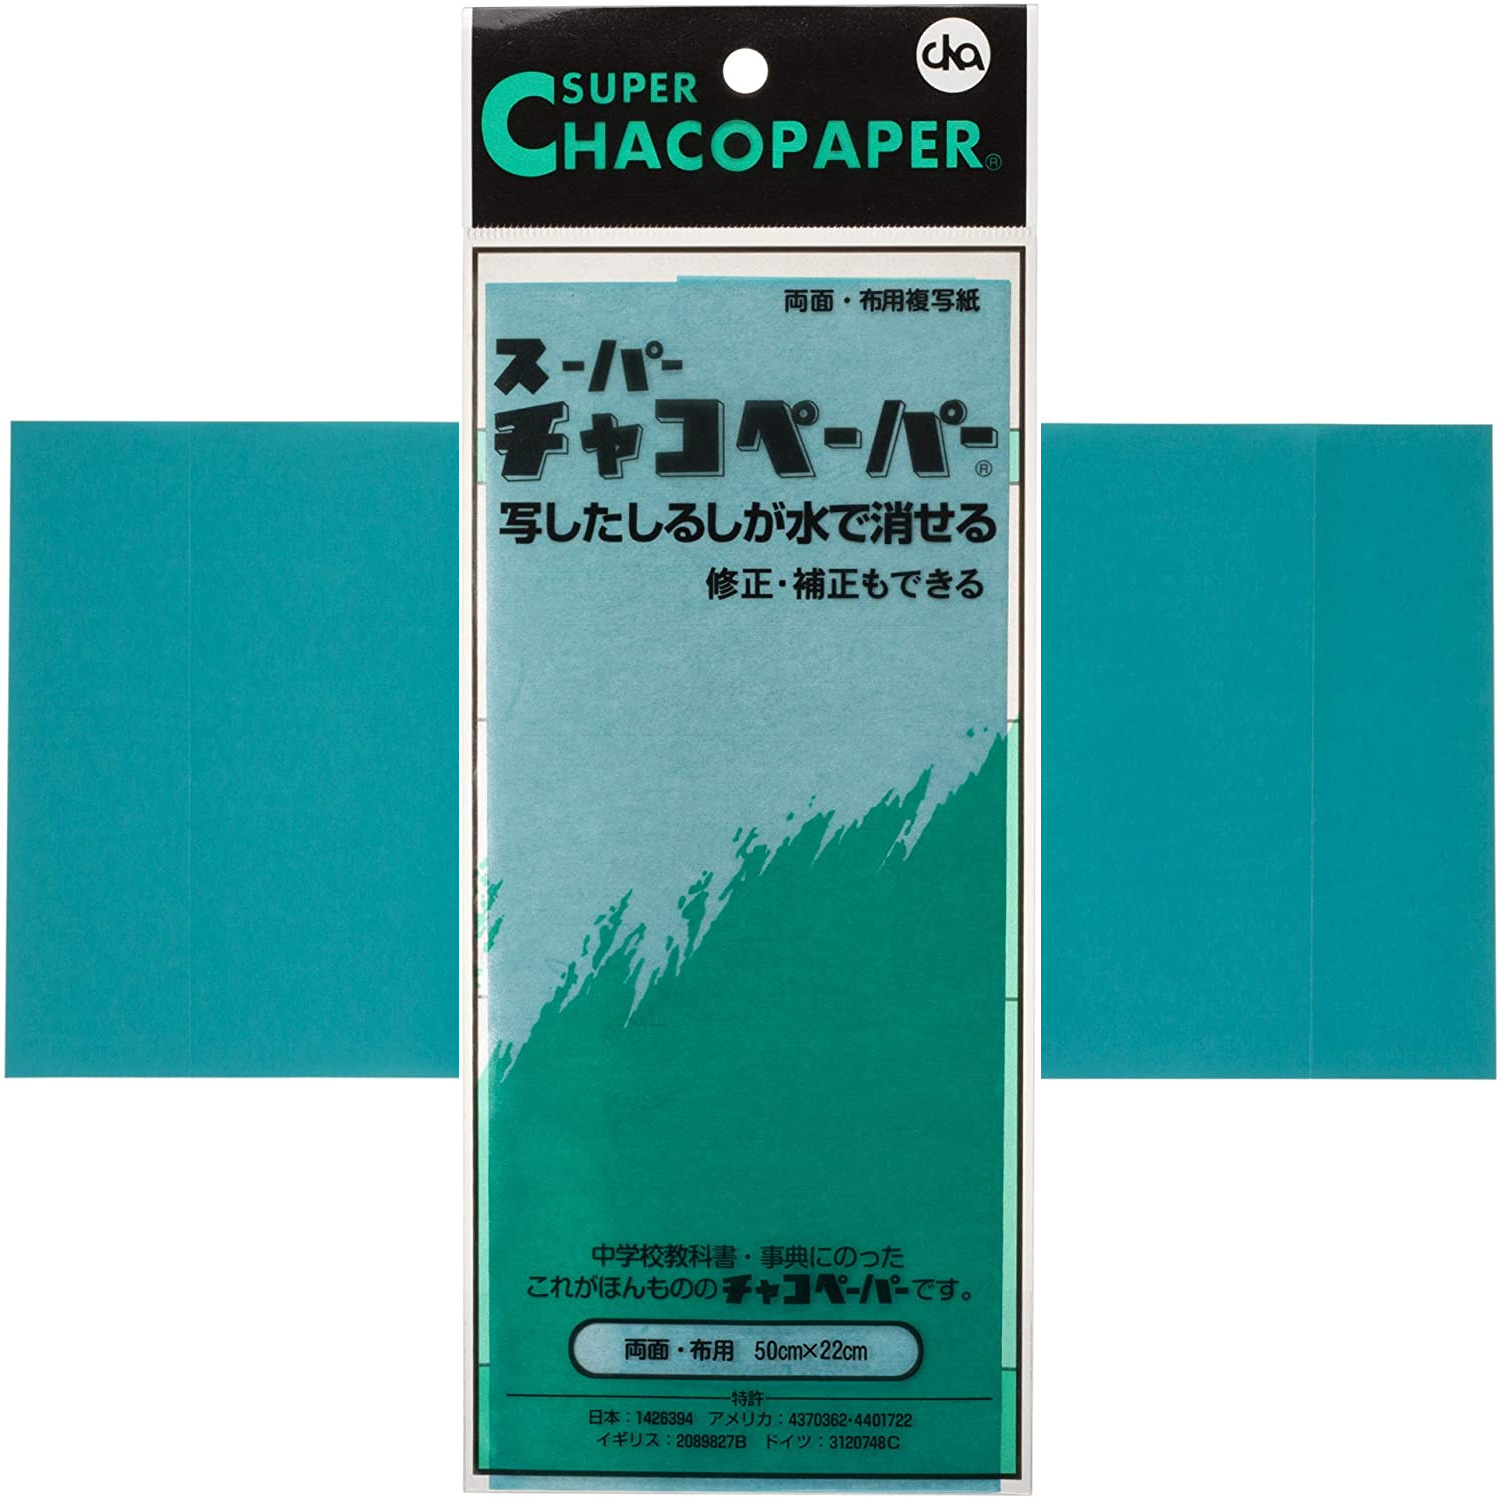 F4-13 Super Chaco Paper, Double-sided Blue (pcs)